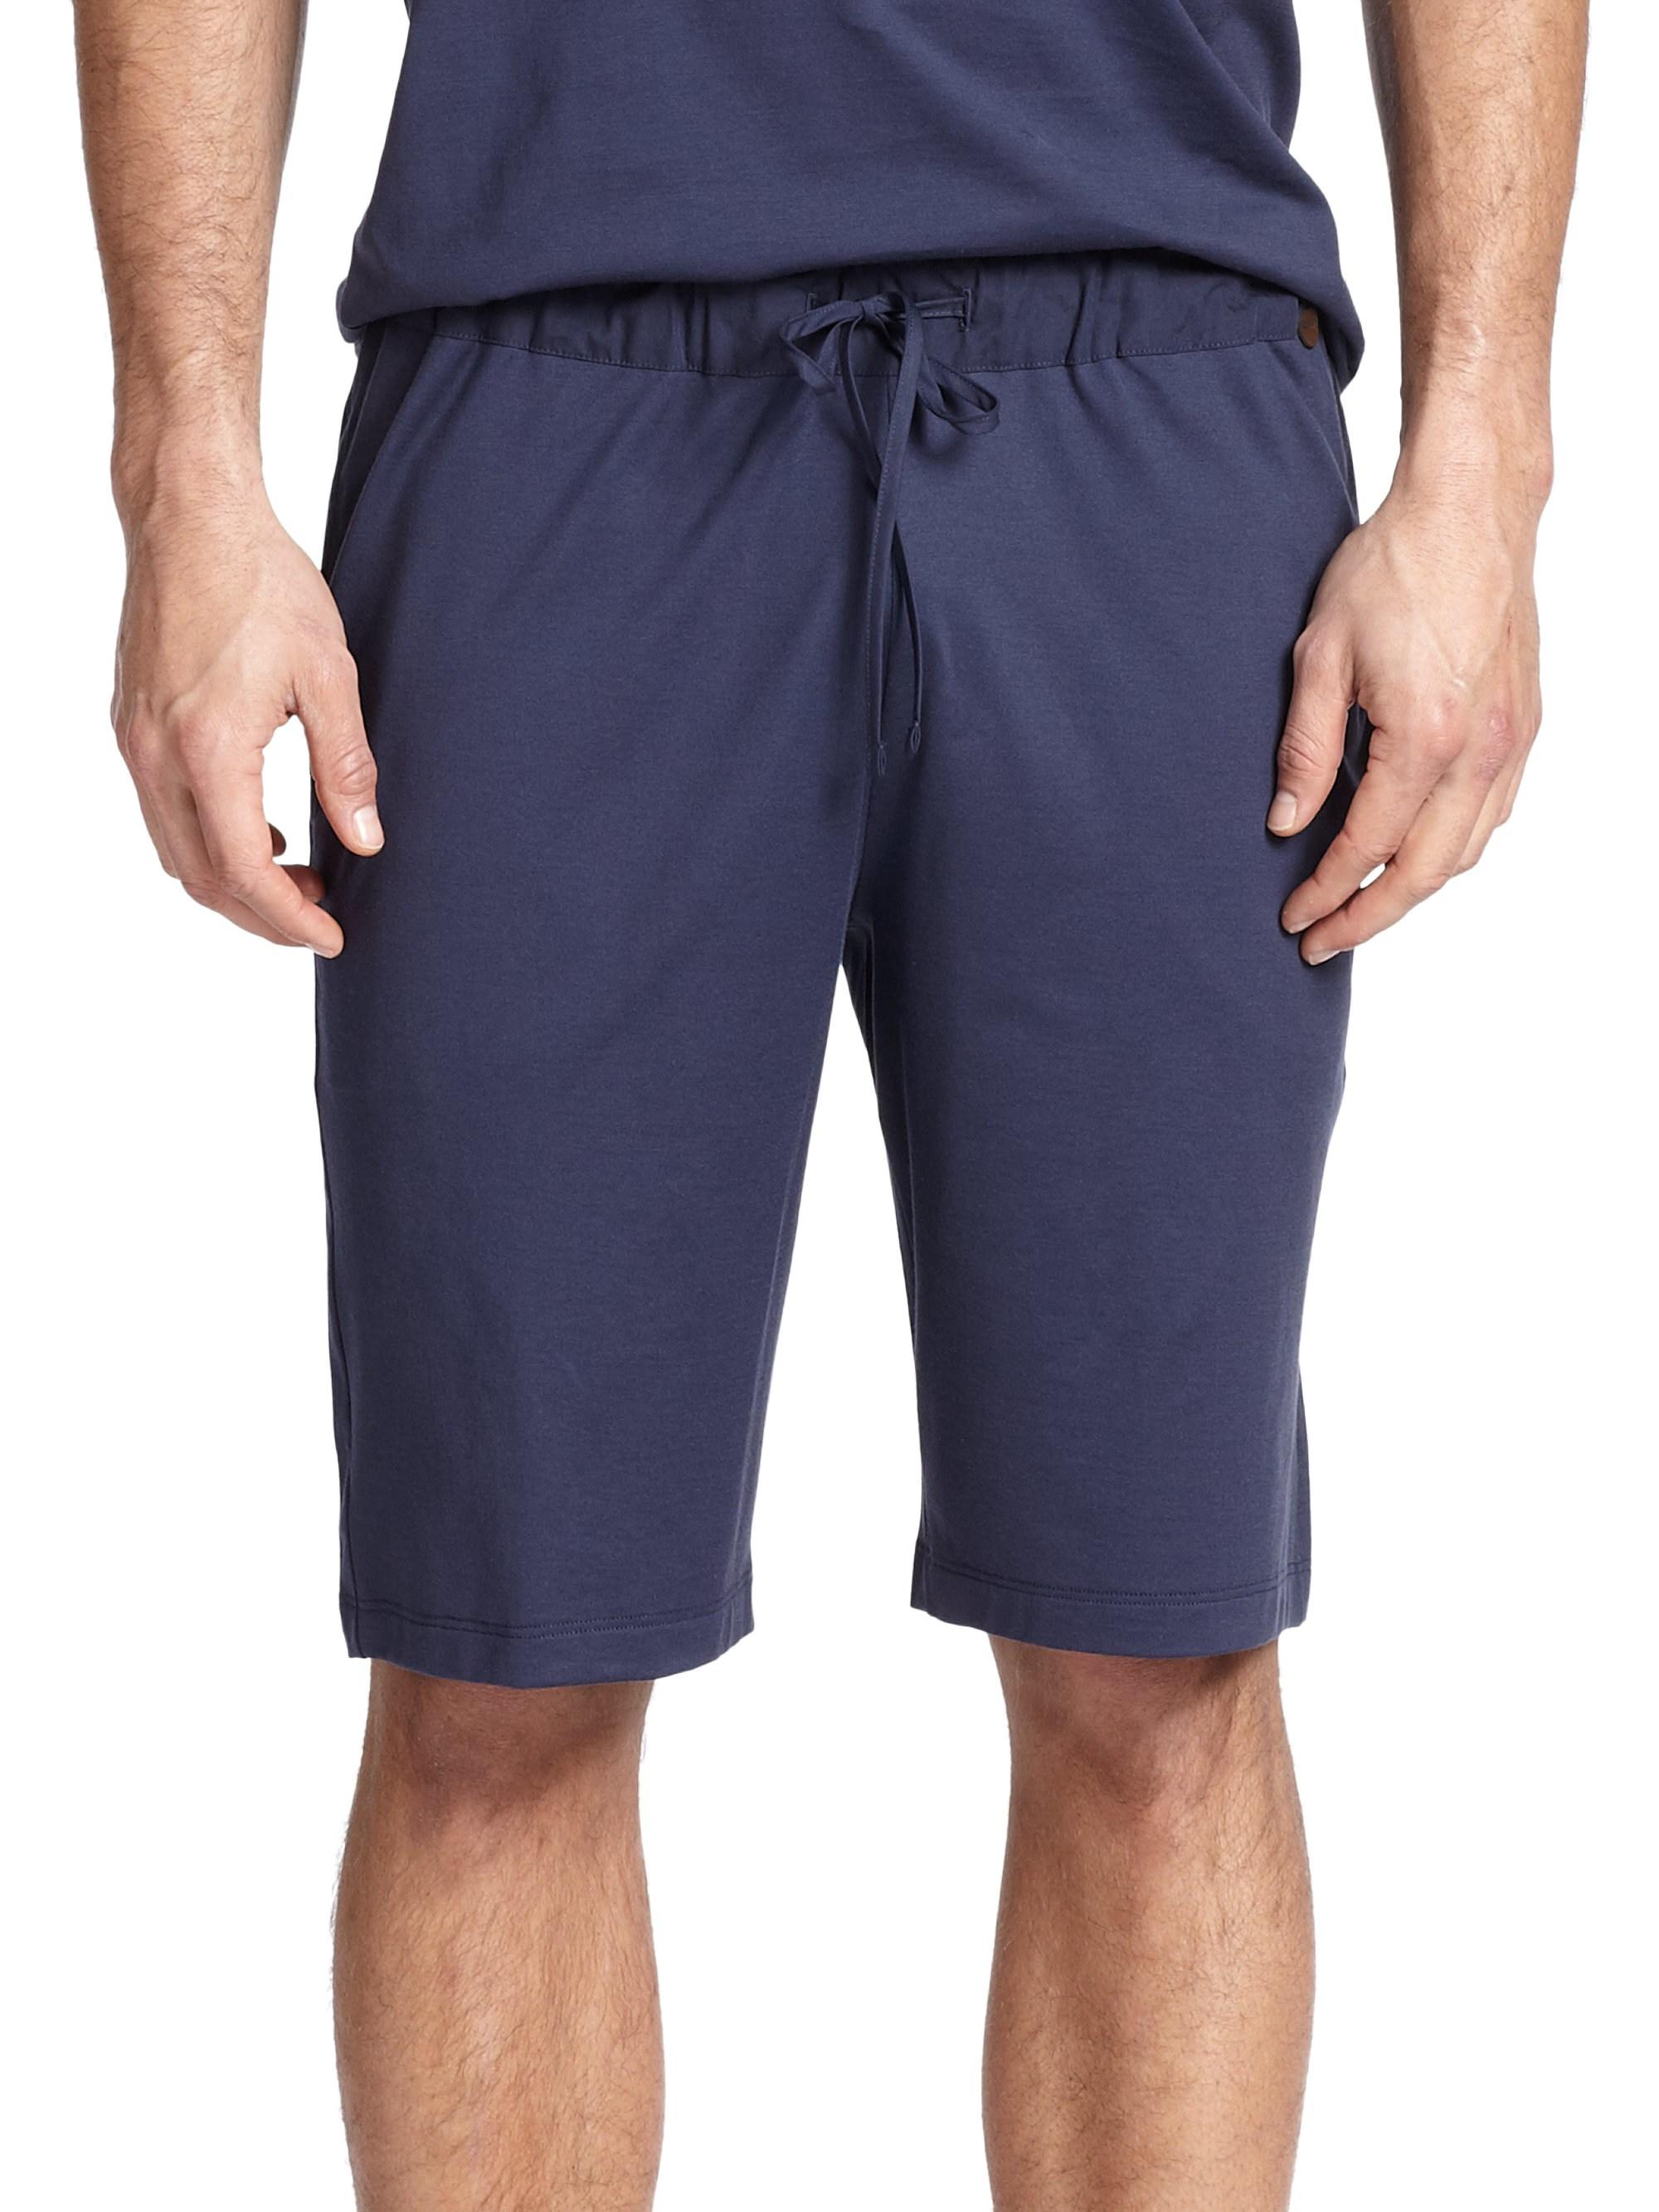 Hanro Cotton Knit Shorts in Blue for Men Lyst